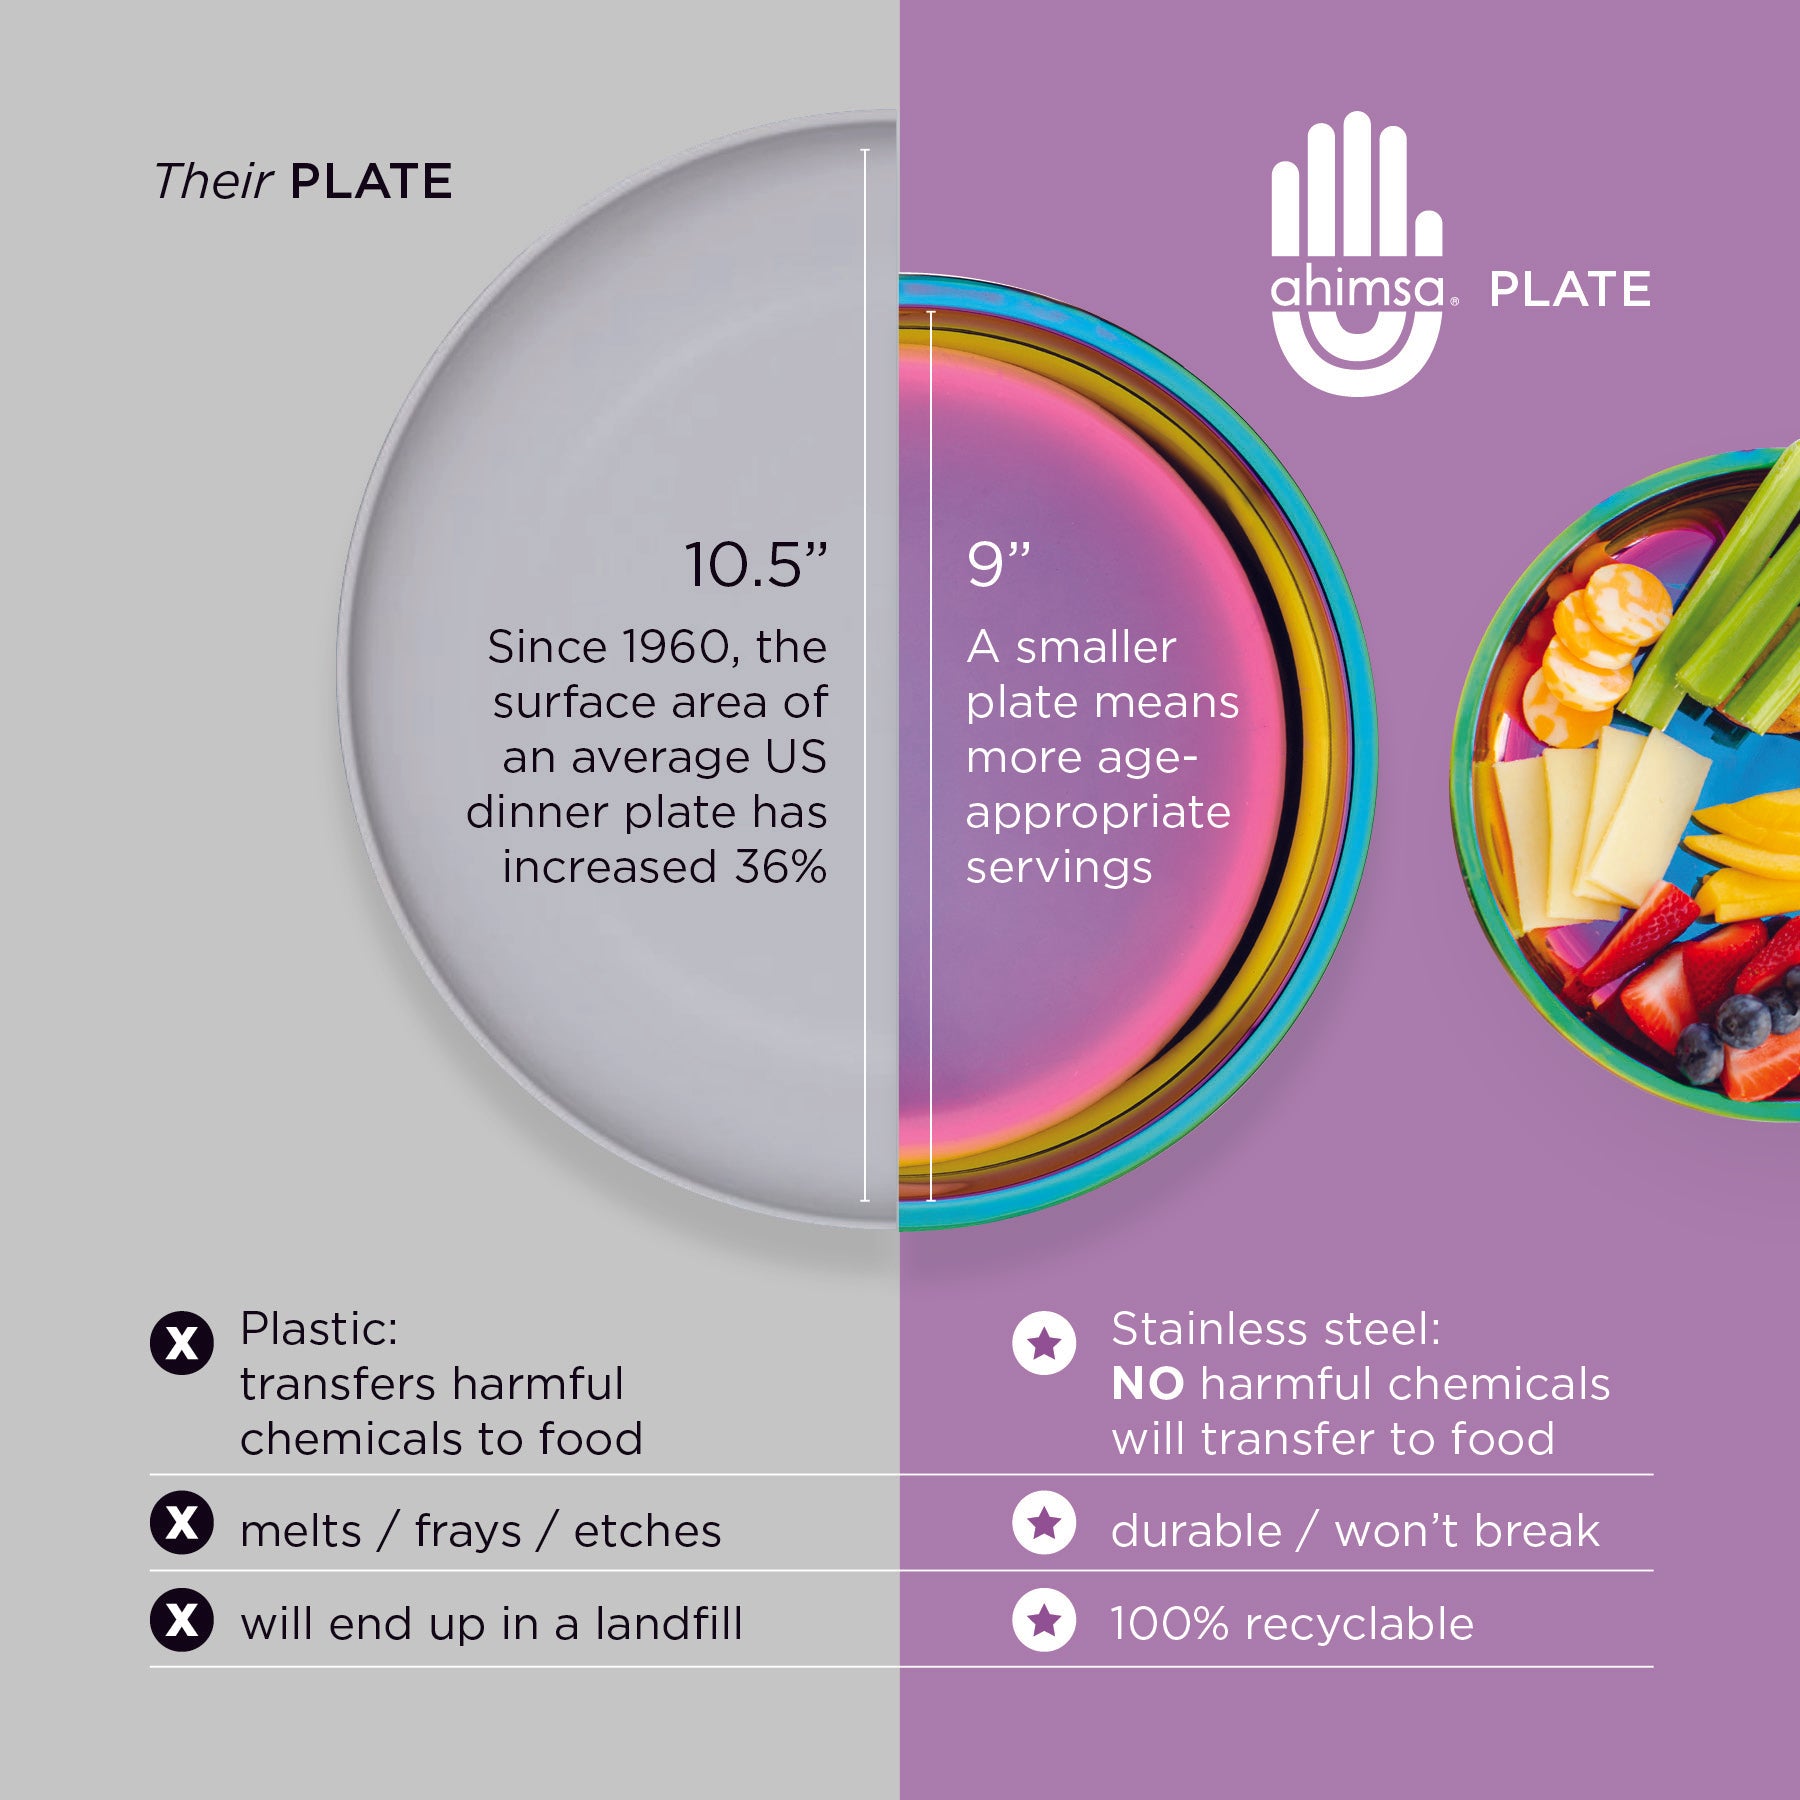 Stainless steel means no harmful chemicals will transfer into food, unlike plastic. Our plates our durable - they won't break and 100% recyclable. Plus a smaller plate means more age-appropriate serving sizes.